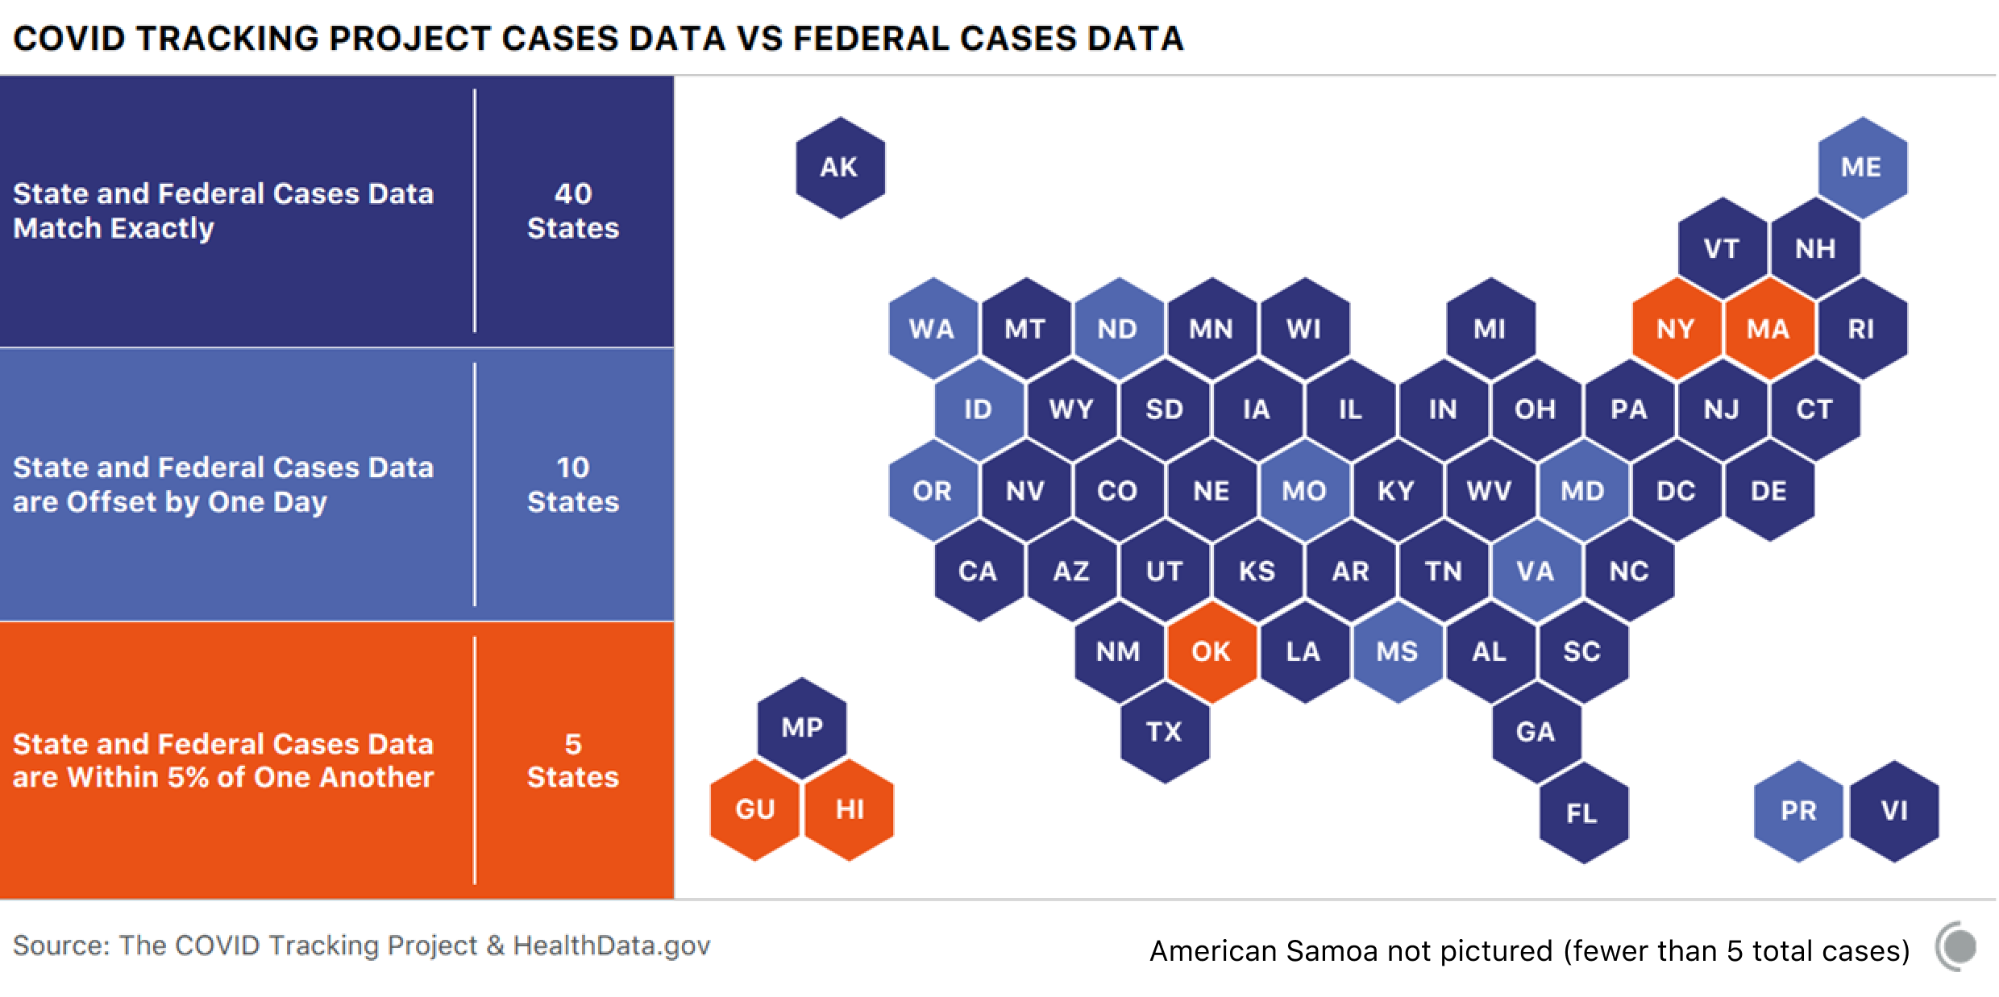 US cartogram showing which states match exactly between CTP and CDC case data. 40 states match exactly, 10 match with a one-day offset, and 5 states show a difference of less than 5%.